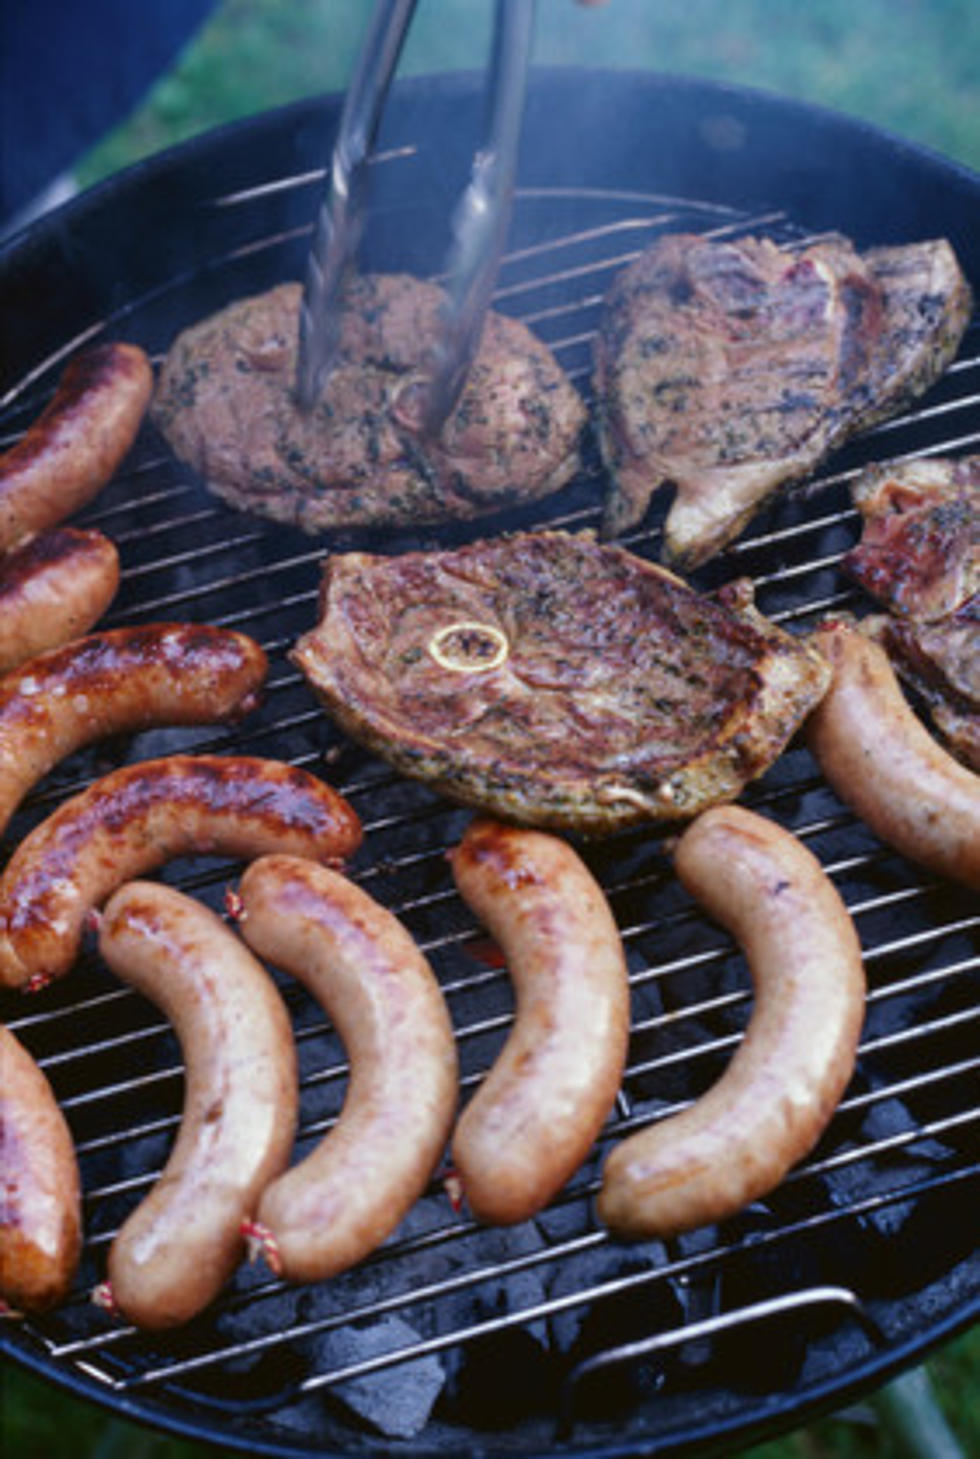 Meat Sold In New York State Recalled Due To &#8216;Temperature Abuse&#8217;